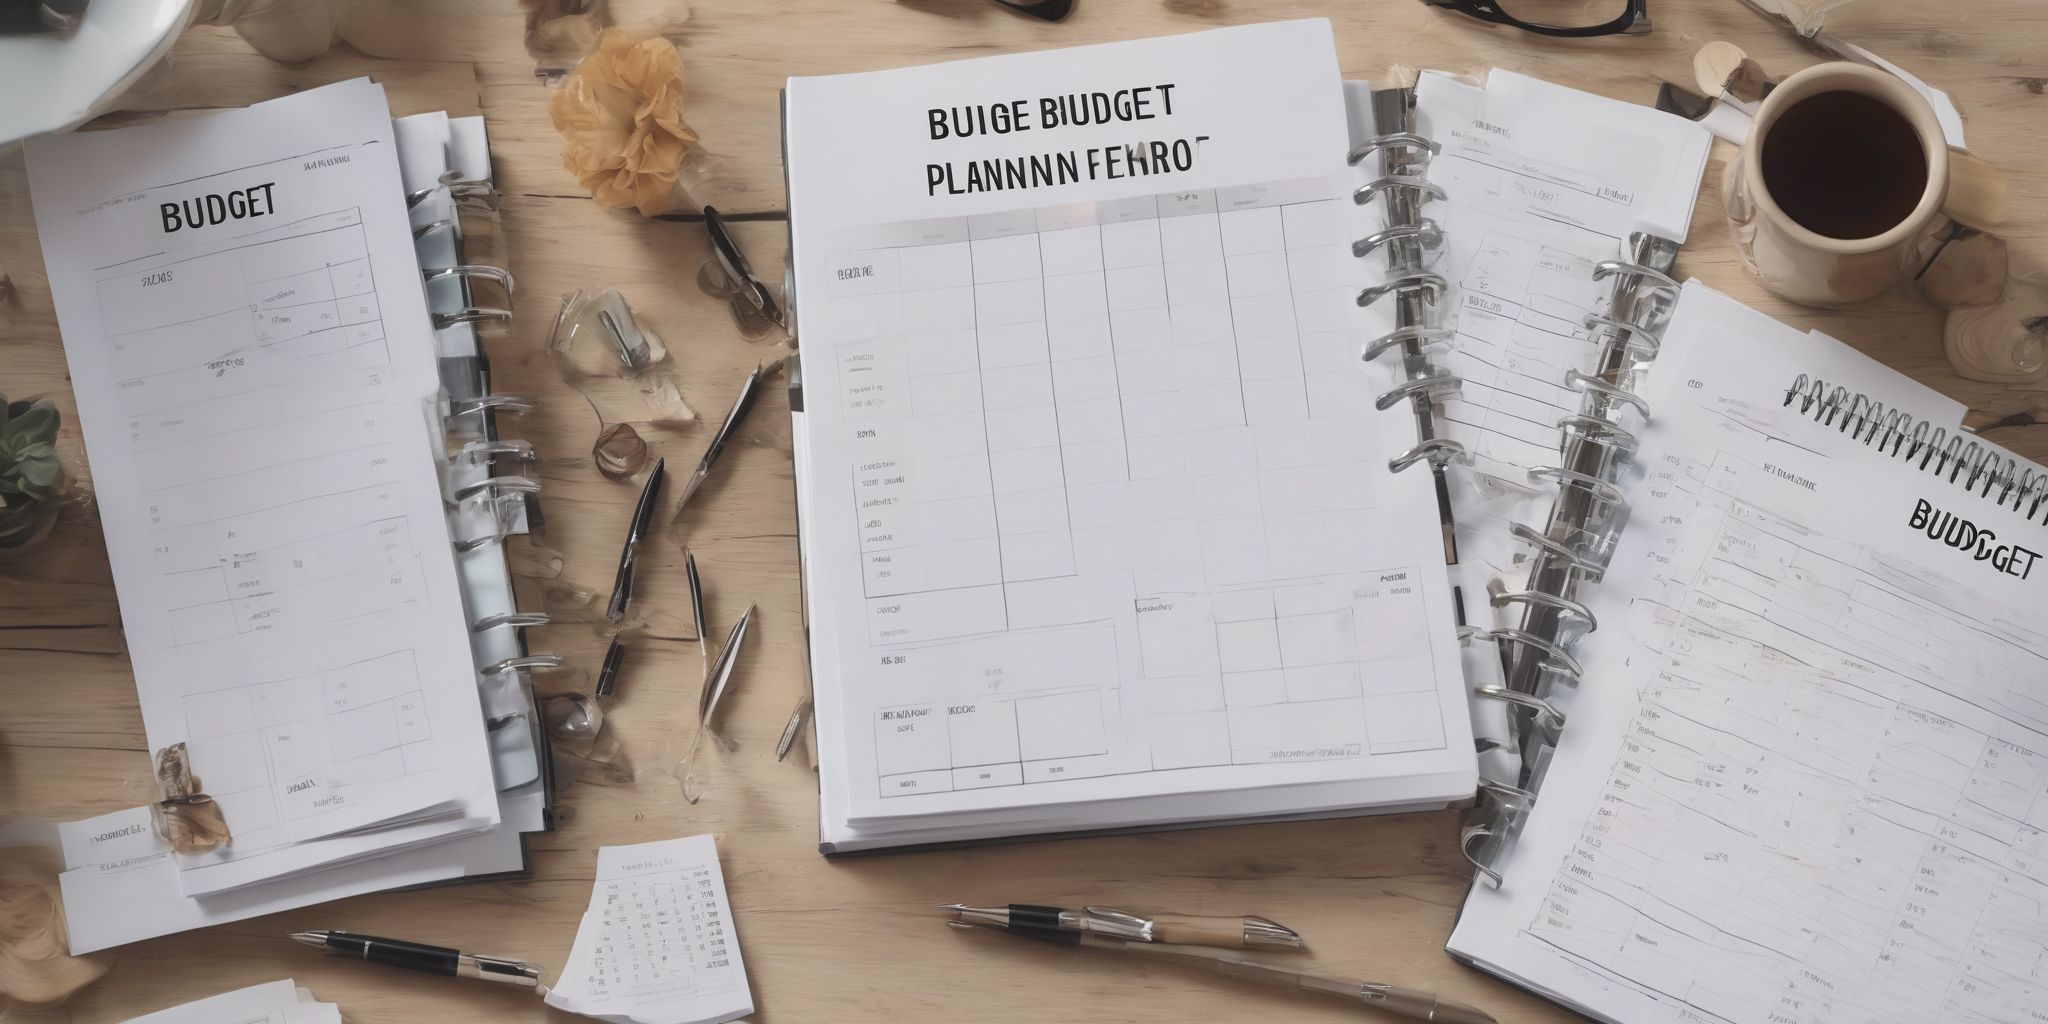 Budget planner  in realistic, photographic style